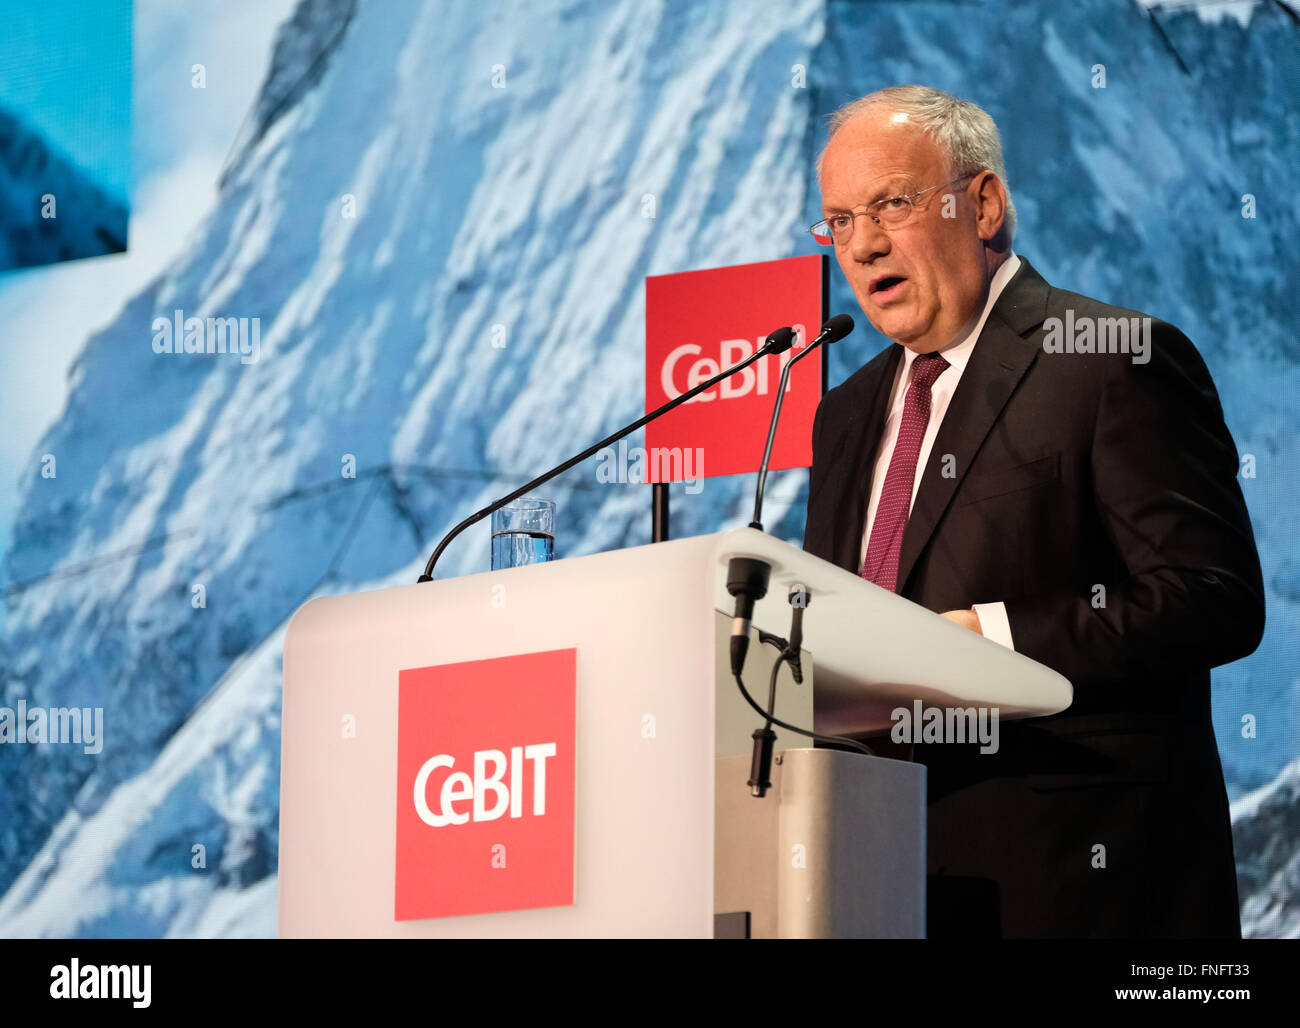 Hanover, Germany. 14th Mar, 2016. Swiss President Johann Schneider-Ammann speaking during the Welcome Night for the CeBIT fair in Hanover, Germany, 14 March 2016. PHOTO: PETER STEFFEN/DPA/Alamy Live News Stock Photo